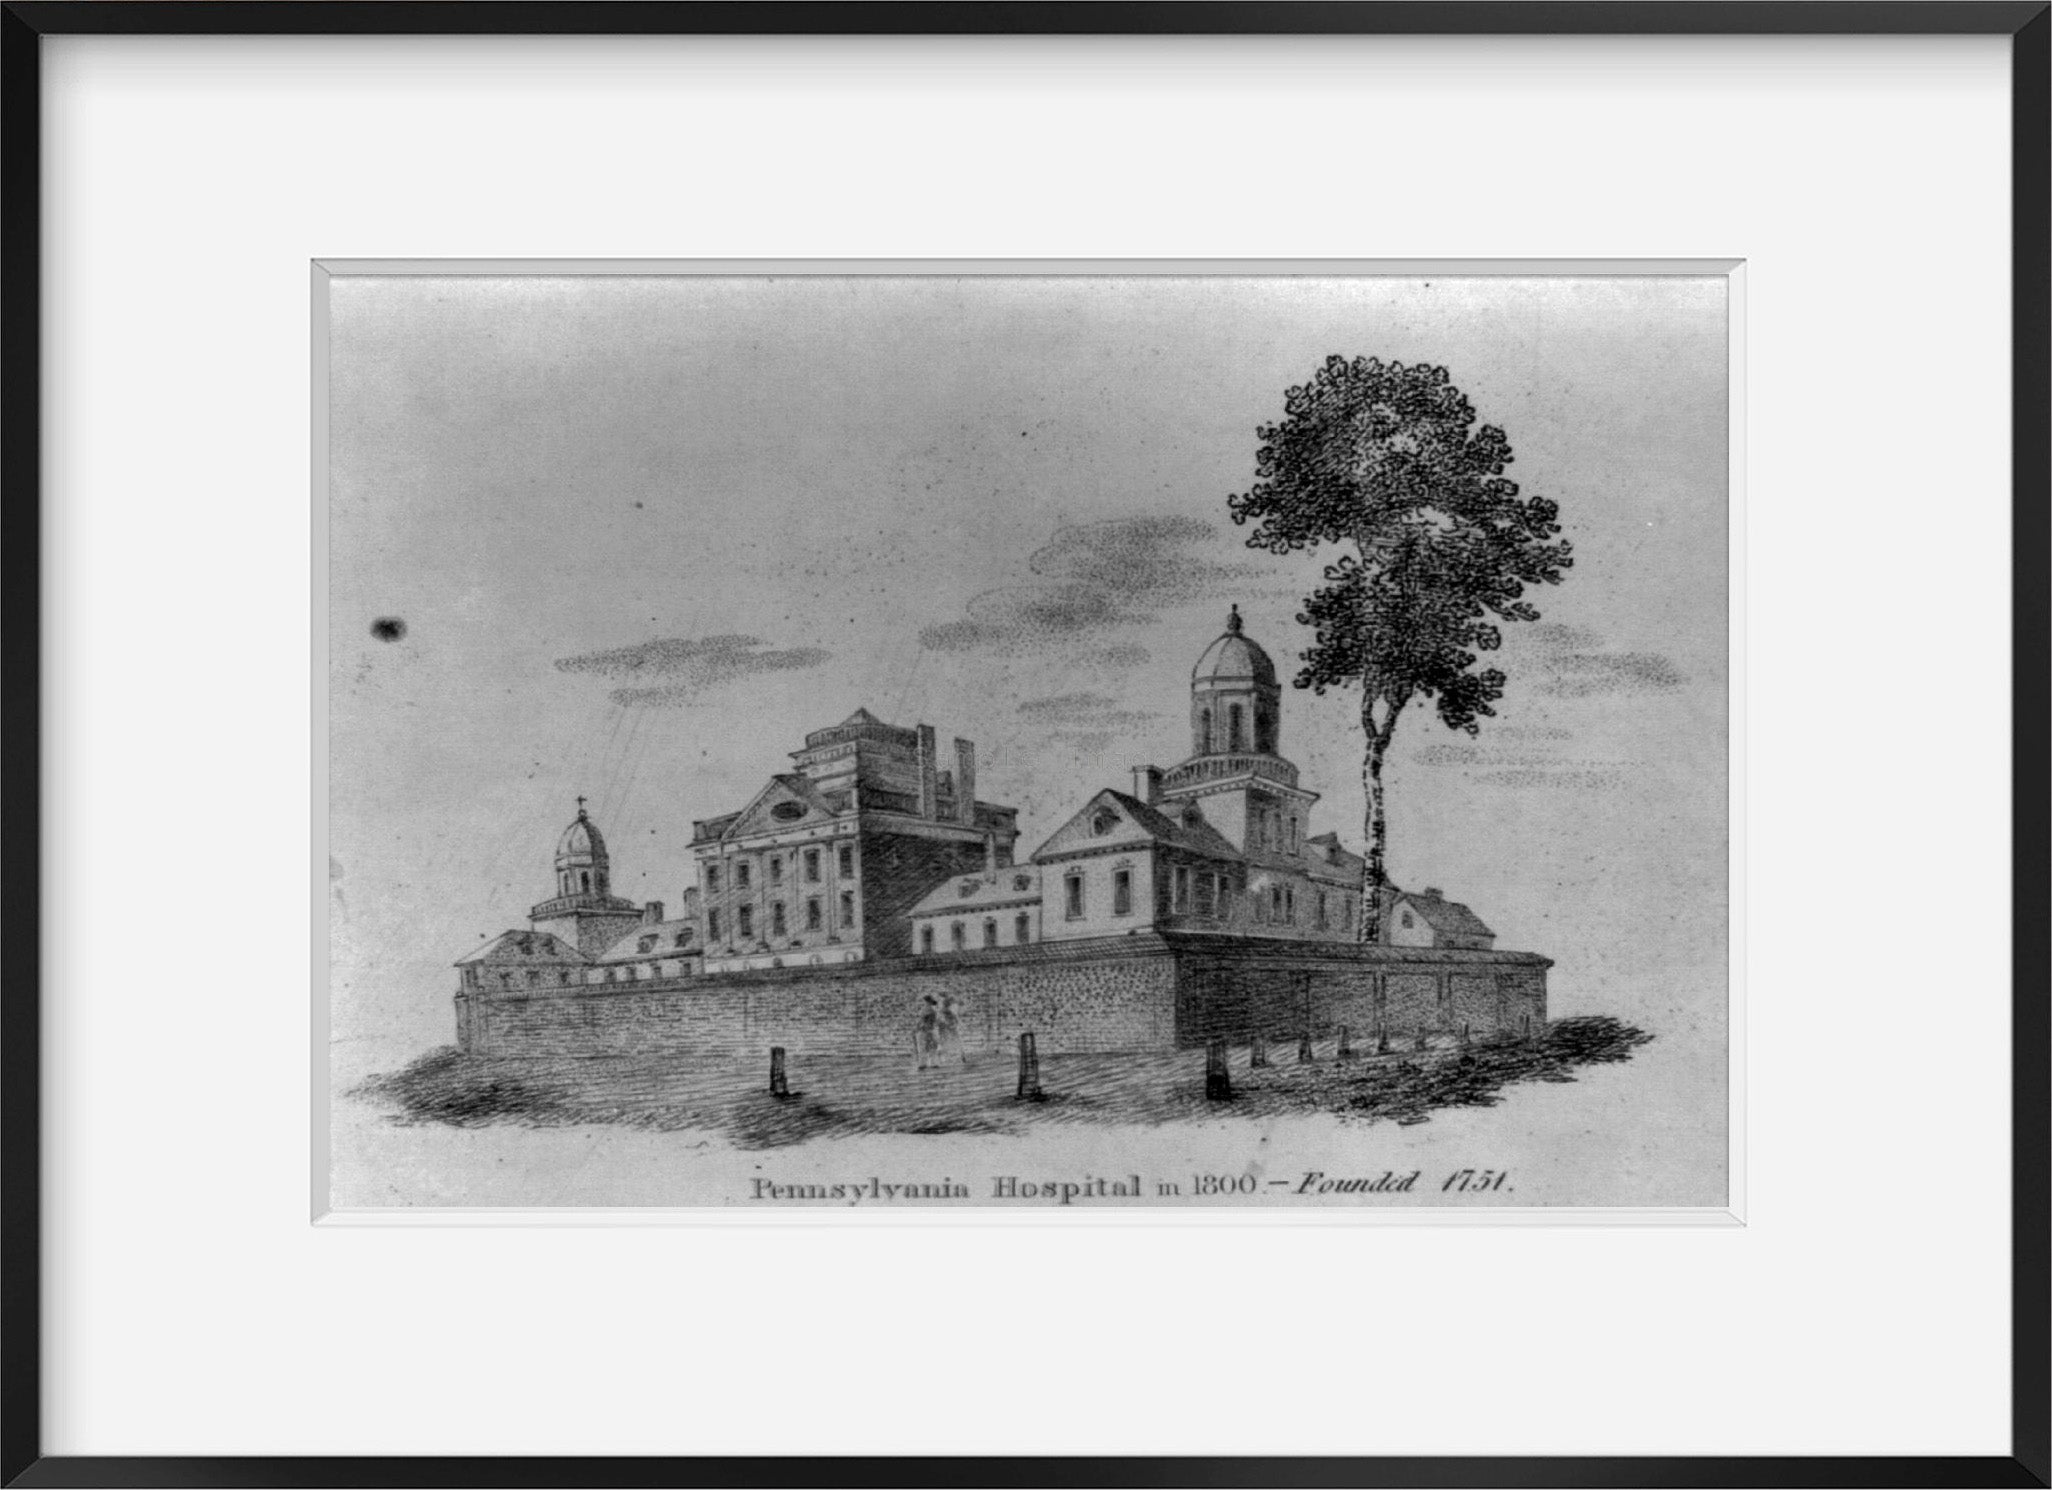 Vintage photograph: Pennsylvania Hospital in 1800 founded, 1751